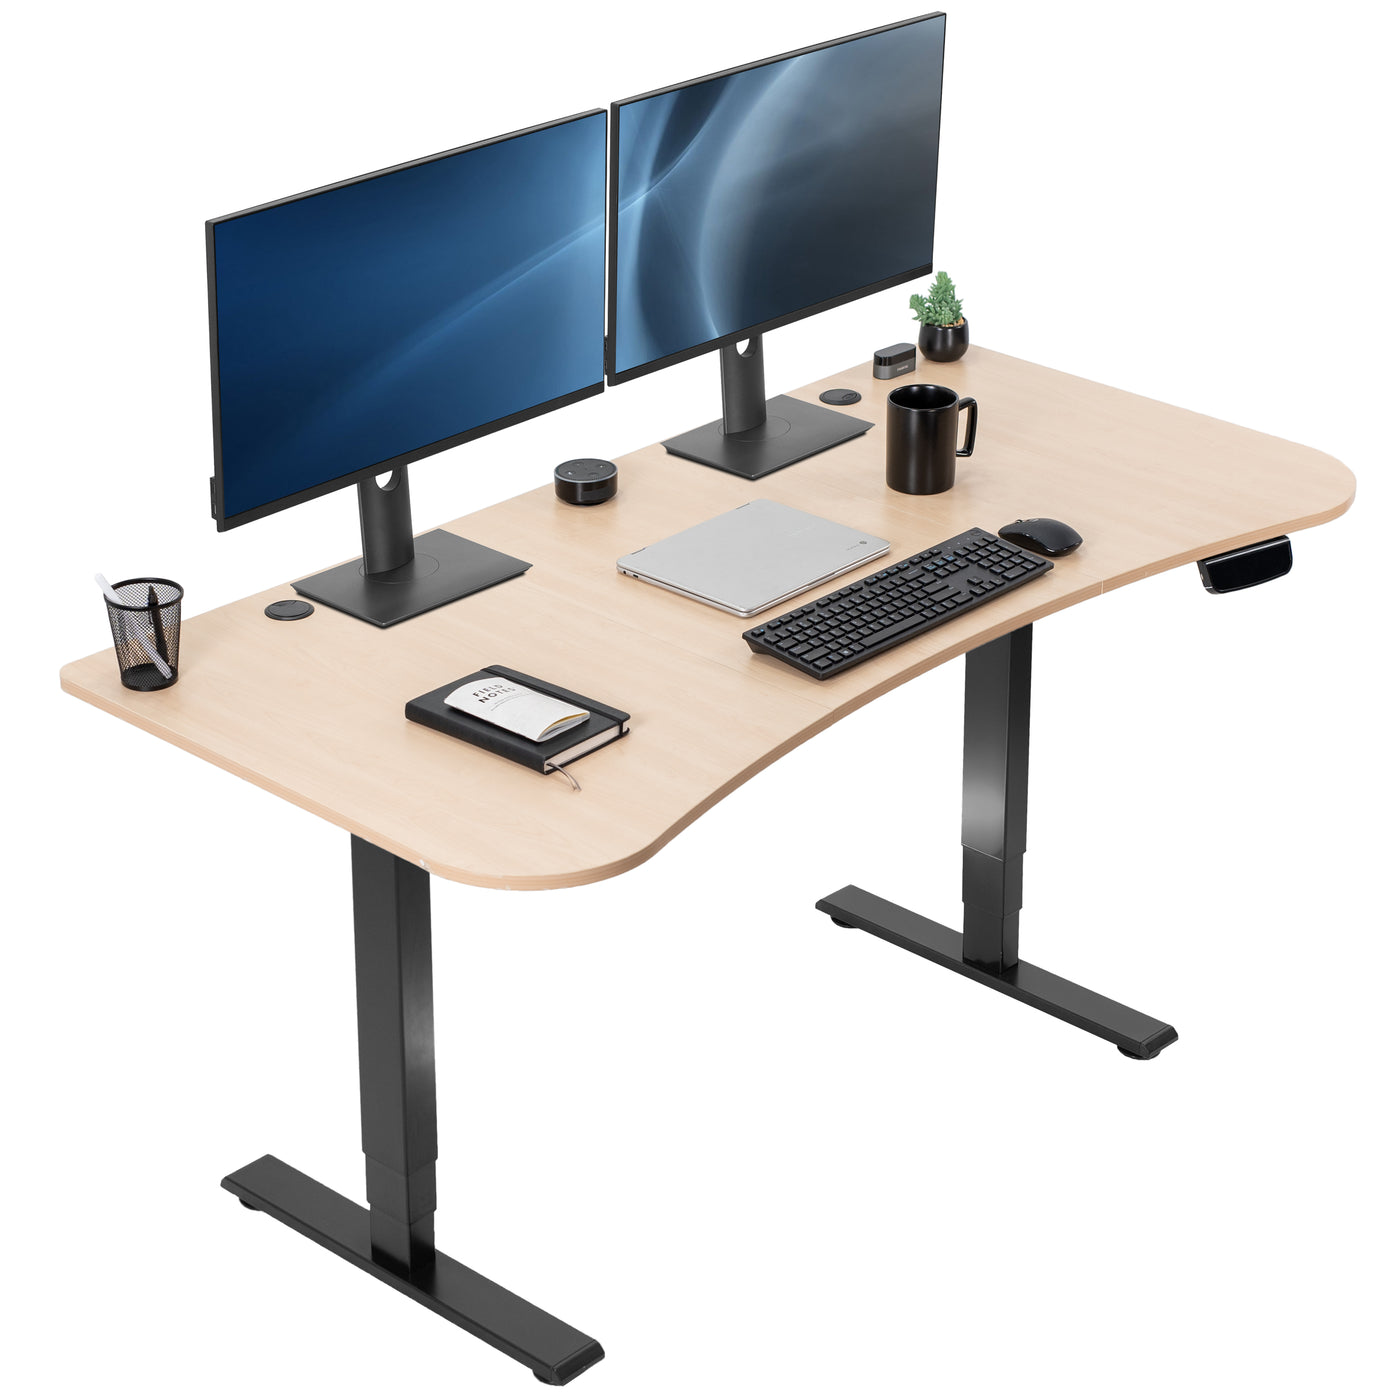 63” x 32” Electric Height Adjustable Stand Up Desk